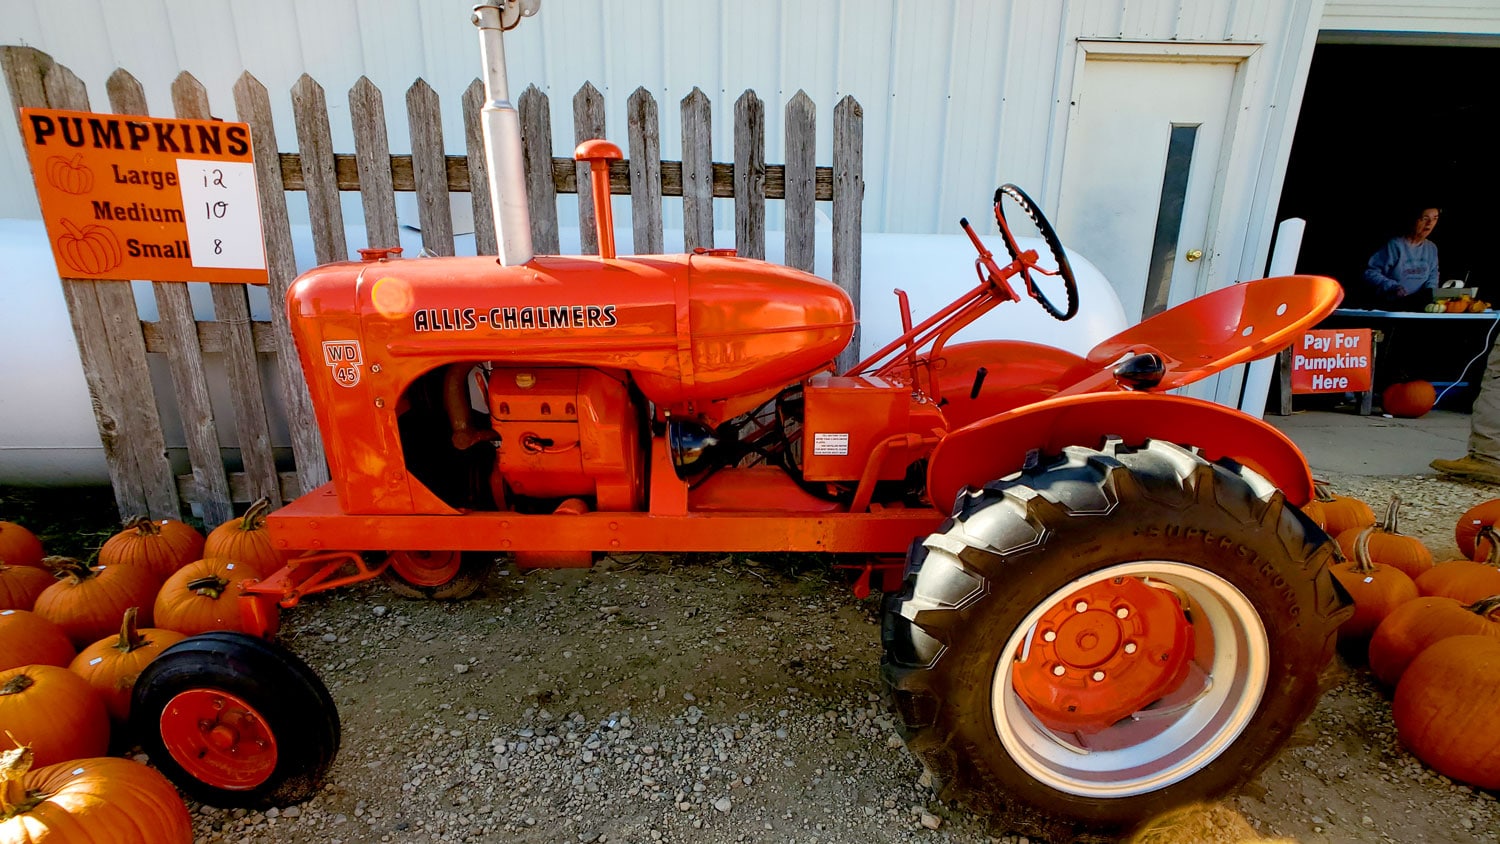 Allis-Chalmers WD 45 tractor at Cody's Farm and Orchard.